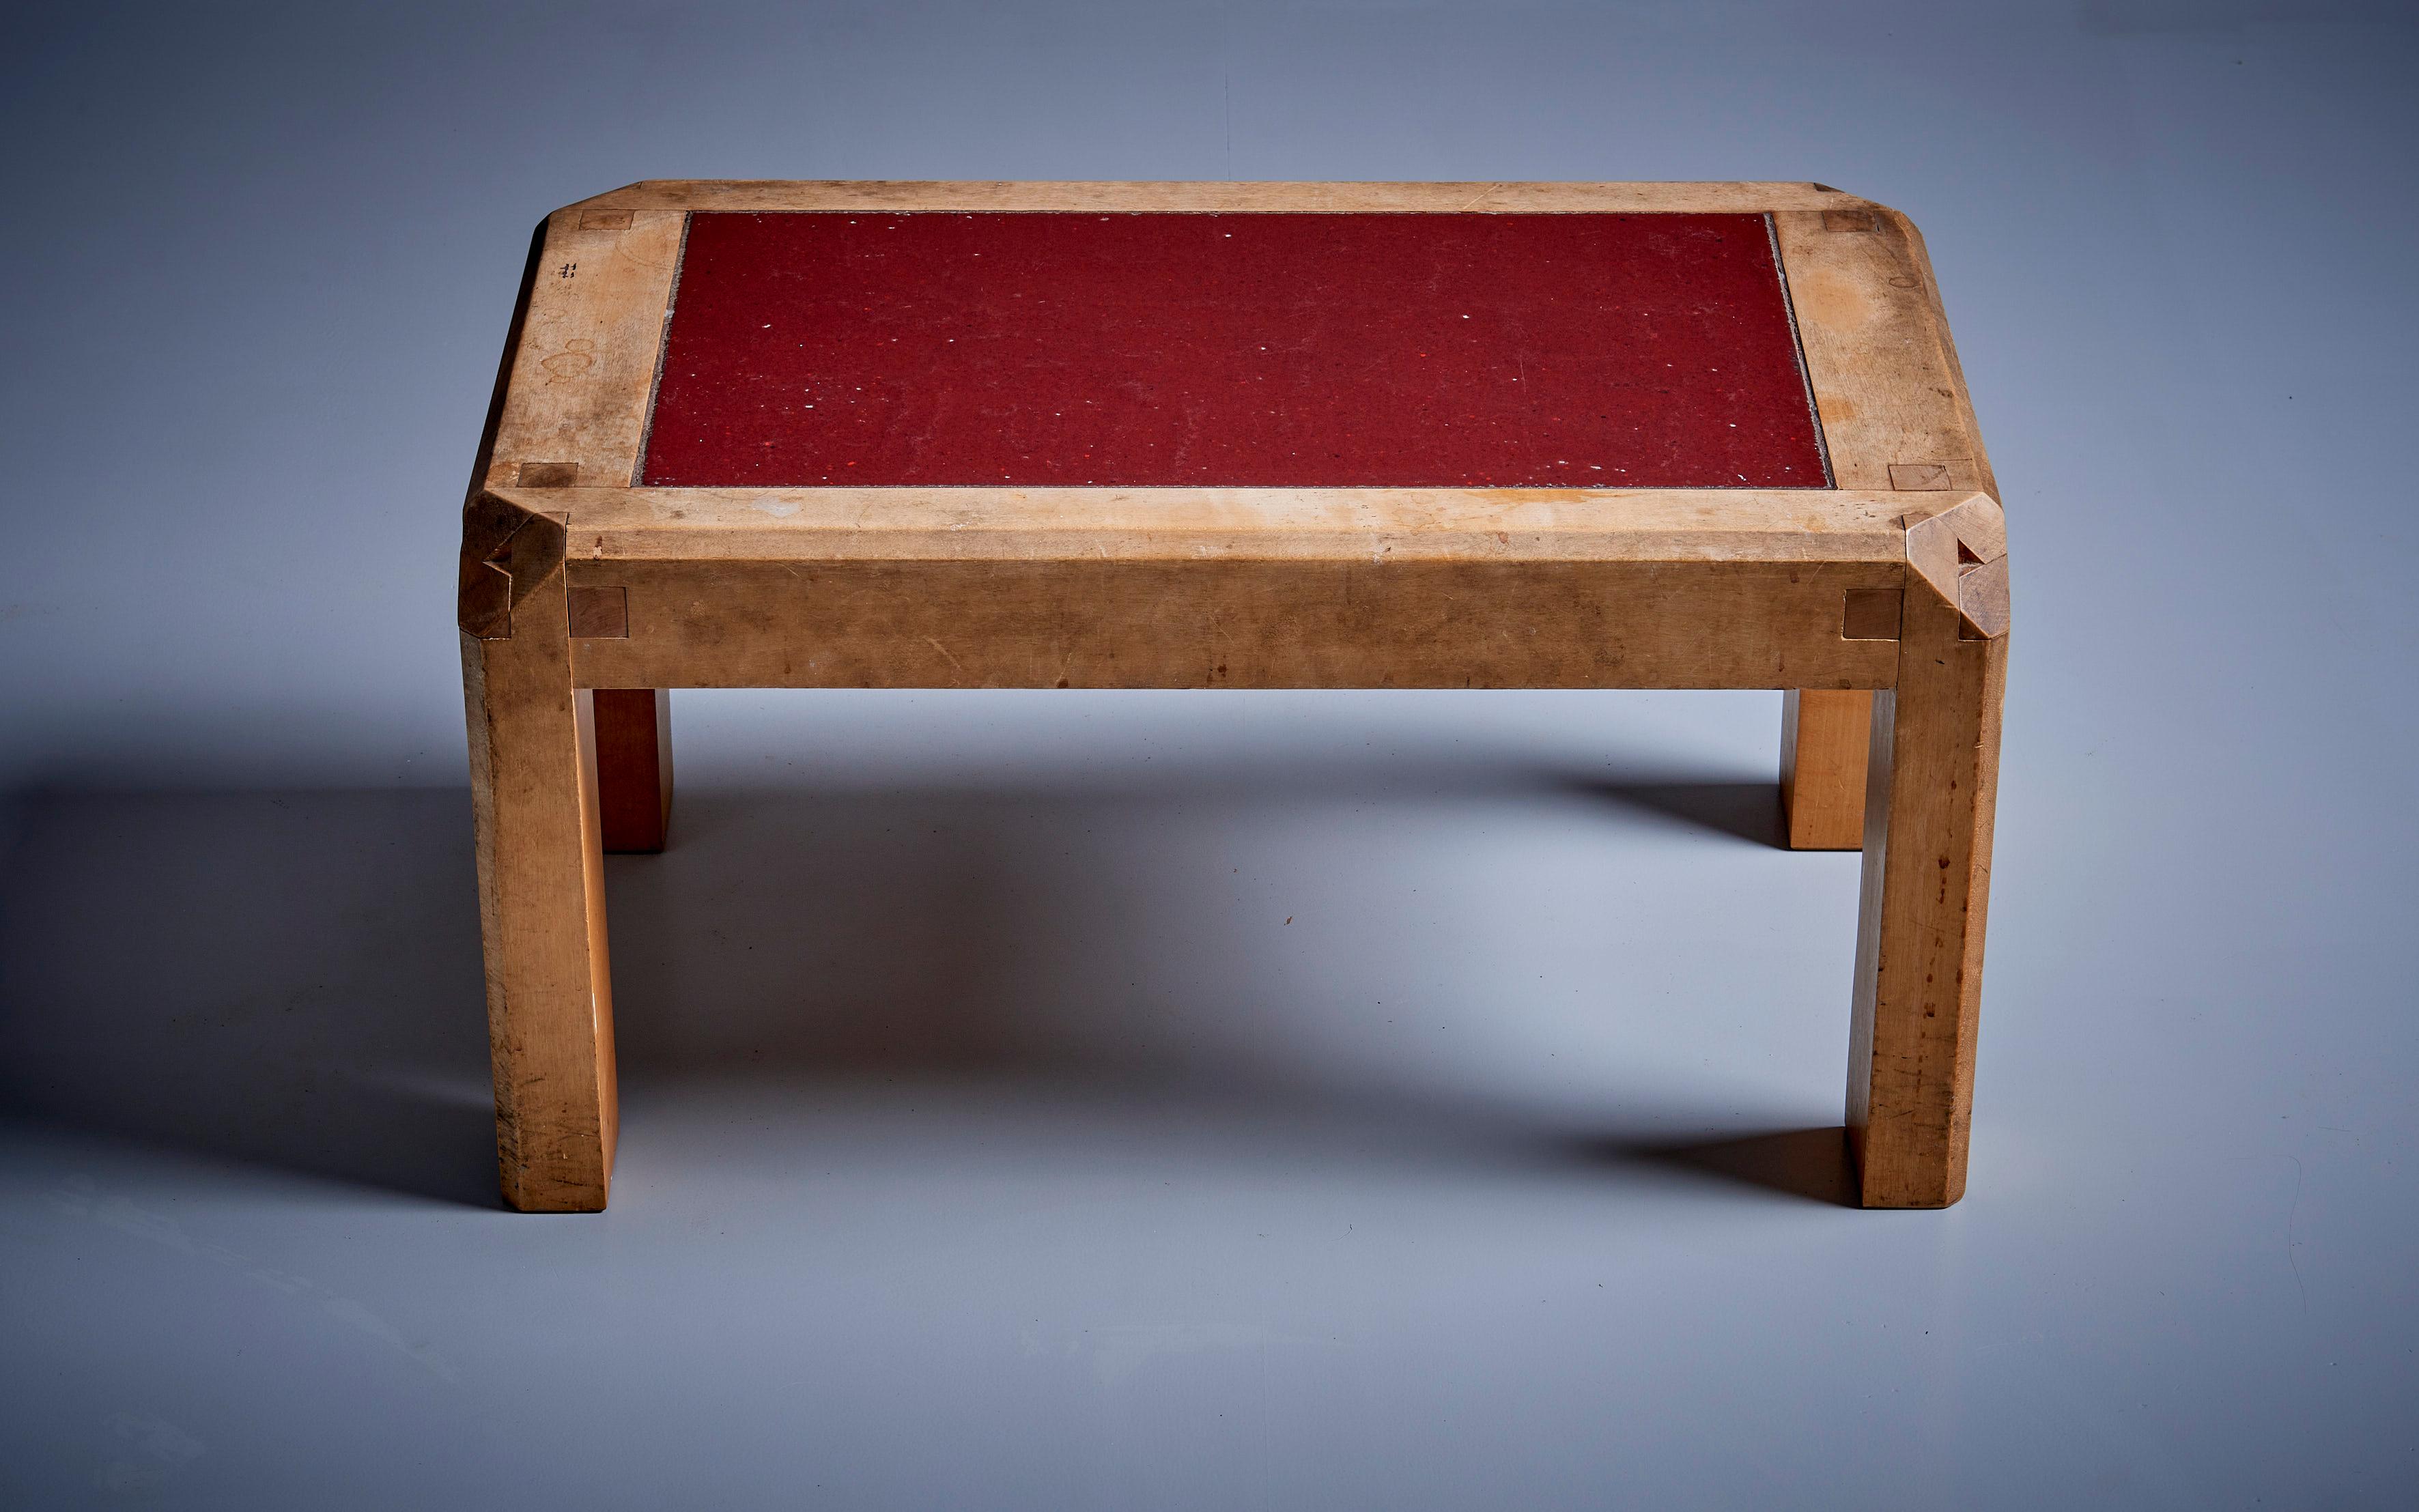 Early Prototype Pierre Chapo T18 Table in original fair condition, France - 1950s. Maple frame and top made of lava stone. 